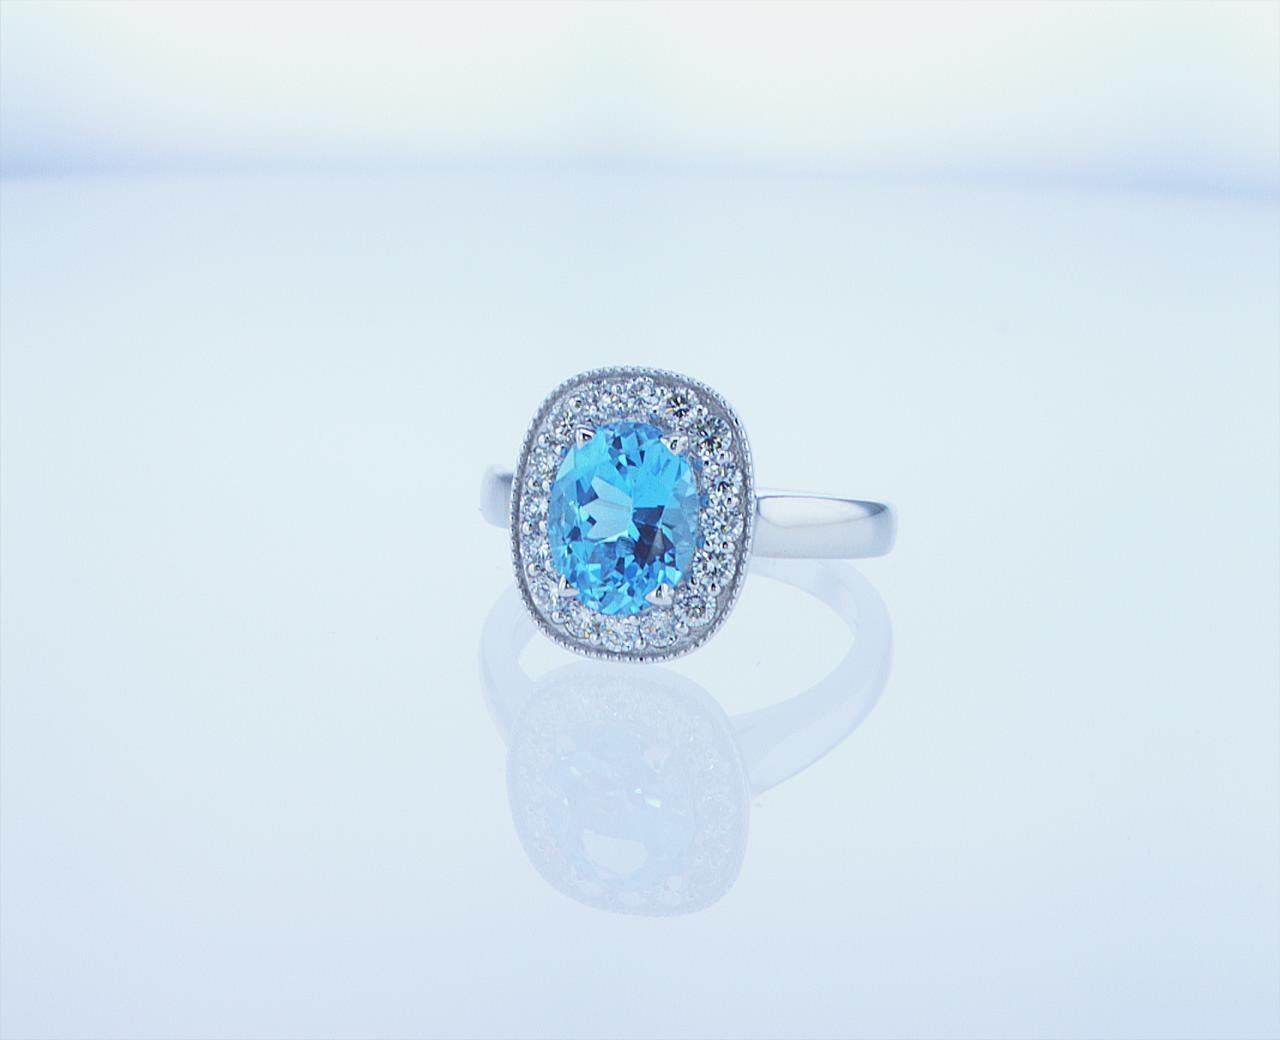 Oval 2.29ct Blue Topaz with 0.51ct total weight of G/H Color, VS Clarity Round Brilliant Diamonds framing the center. 18k White Gold Mounting.